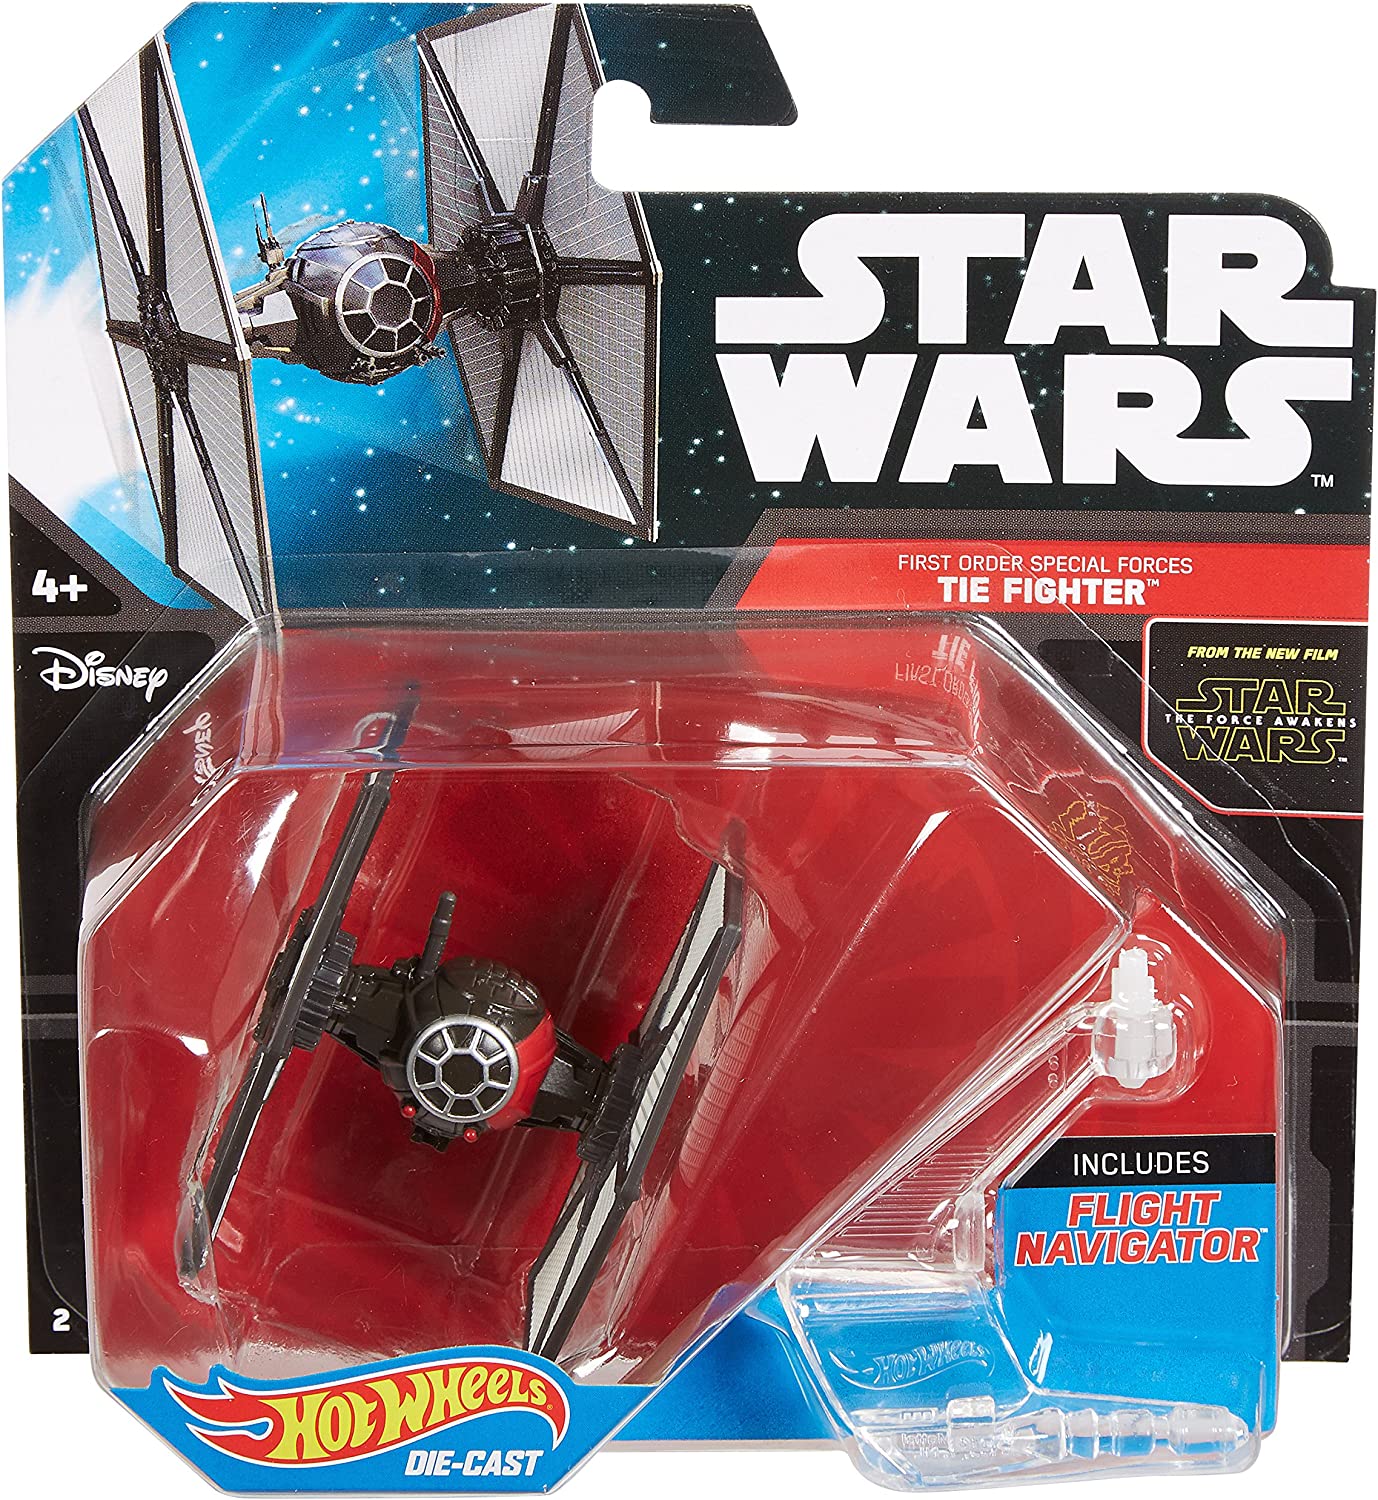 Star Wars Starship First Order Special Forces TIE Fighter | Hot Wheels